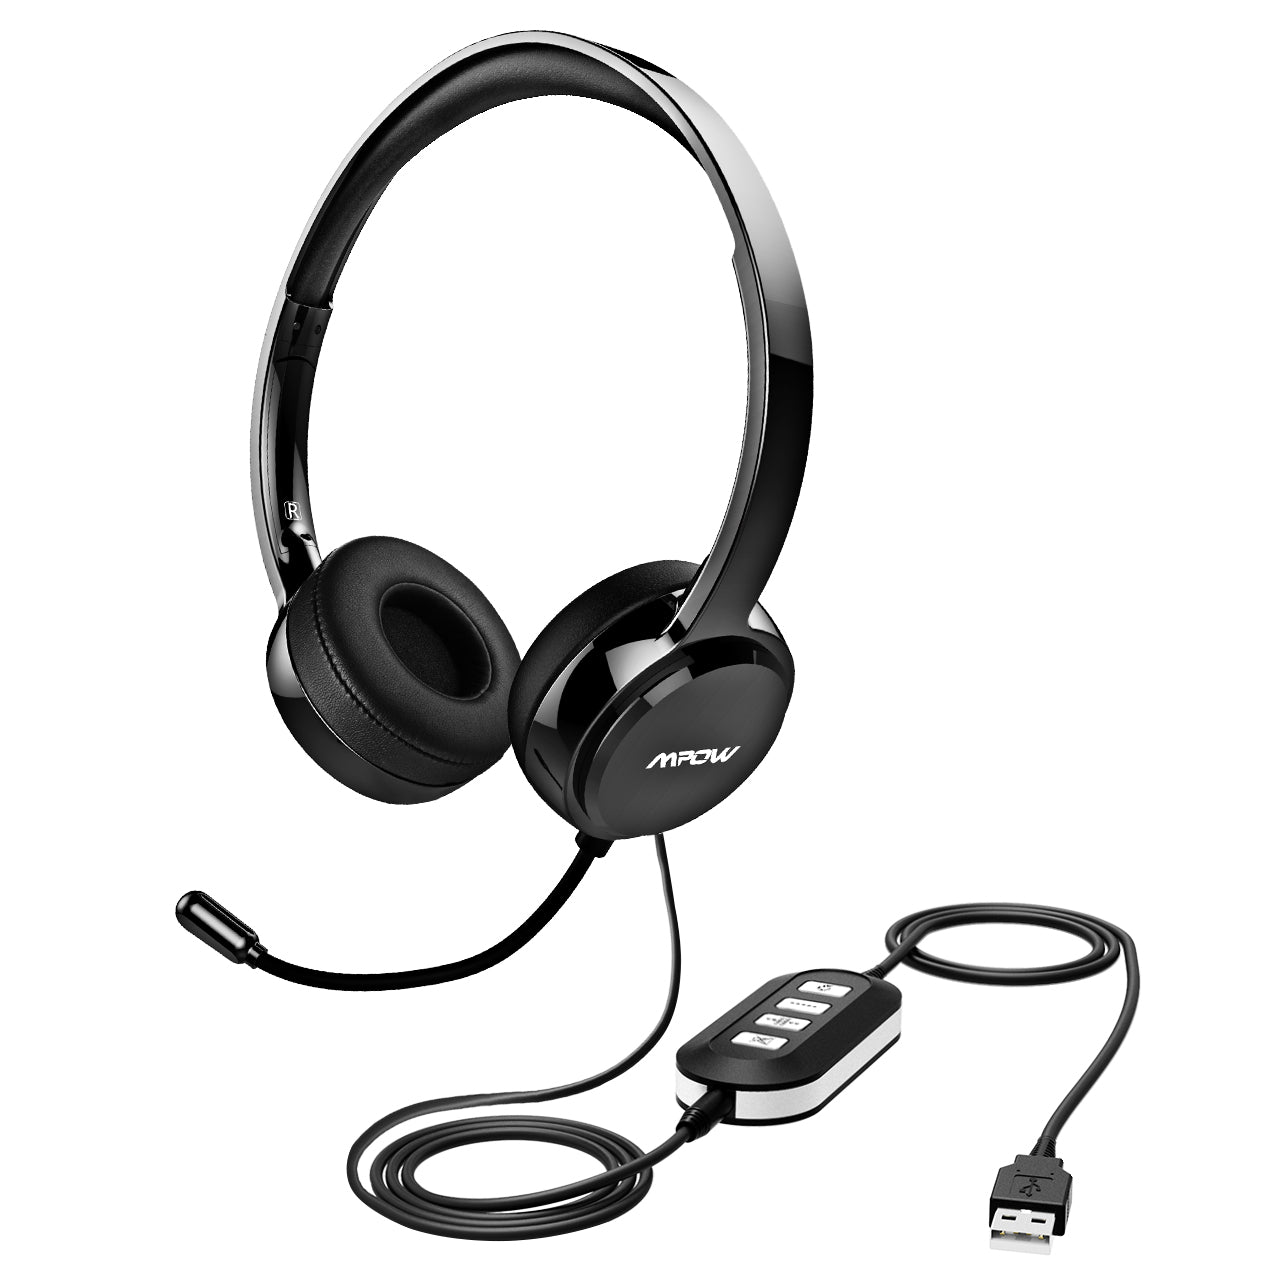 Mpow 071 3.5mm& USB Headset Microphone WHOLESE – MPOW